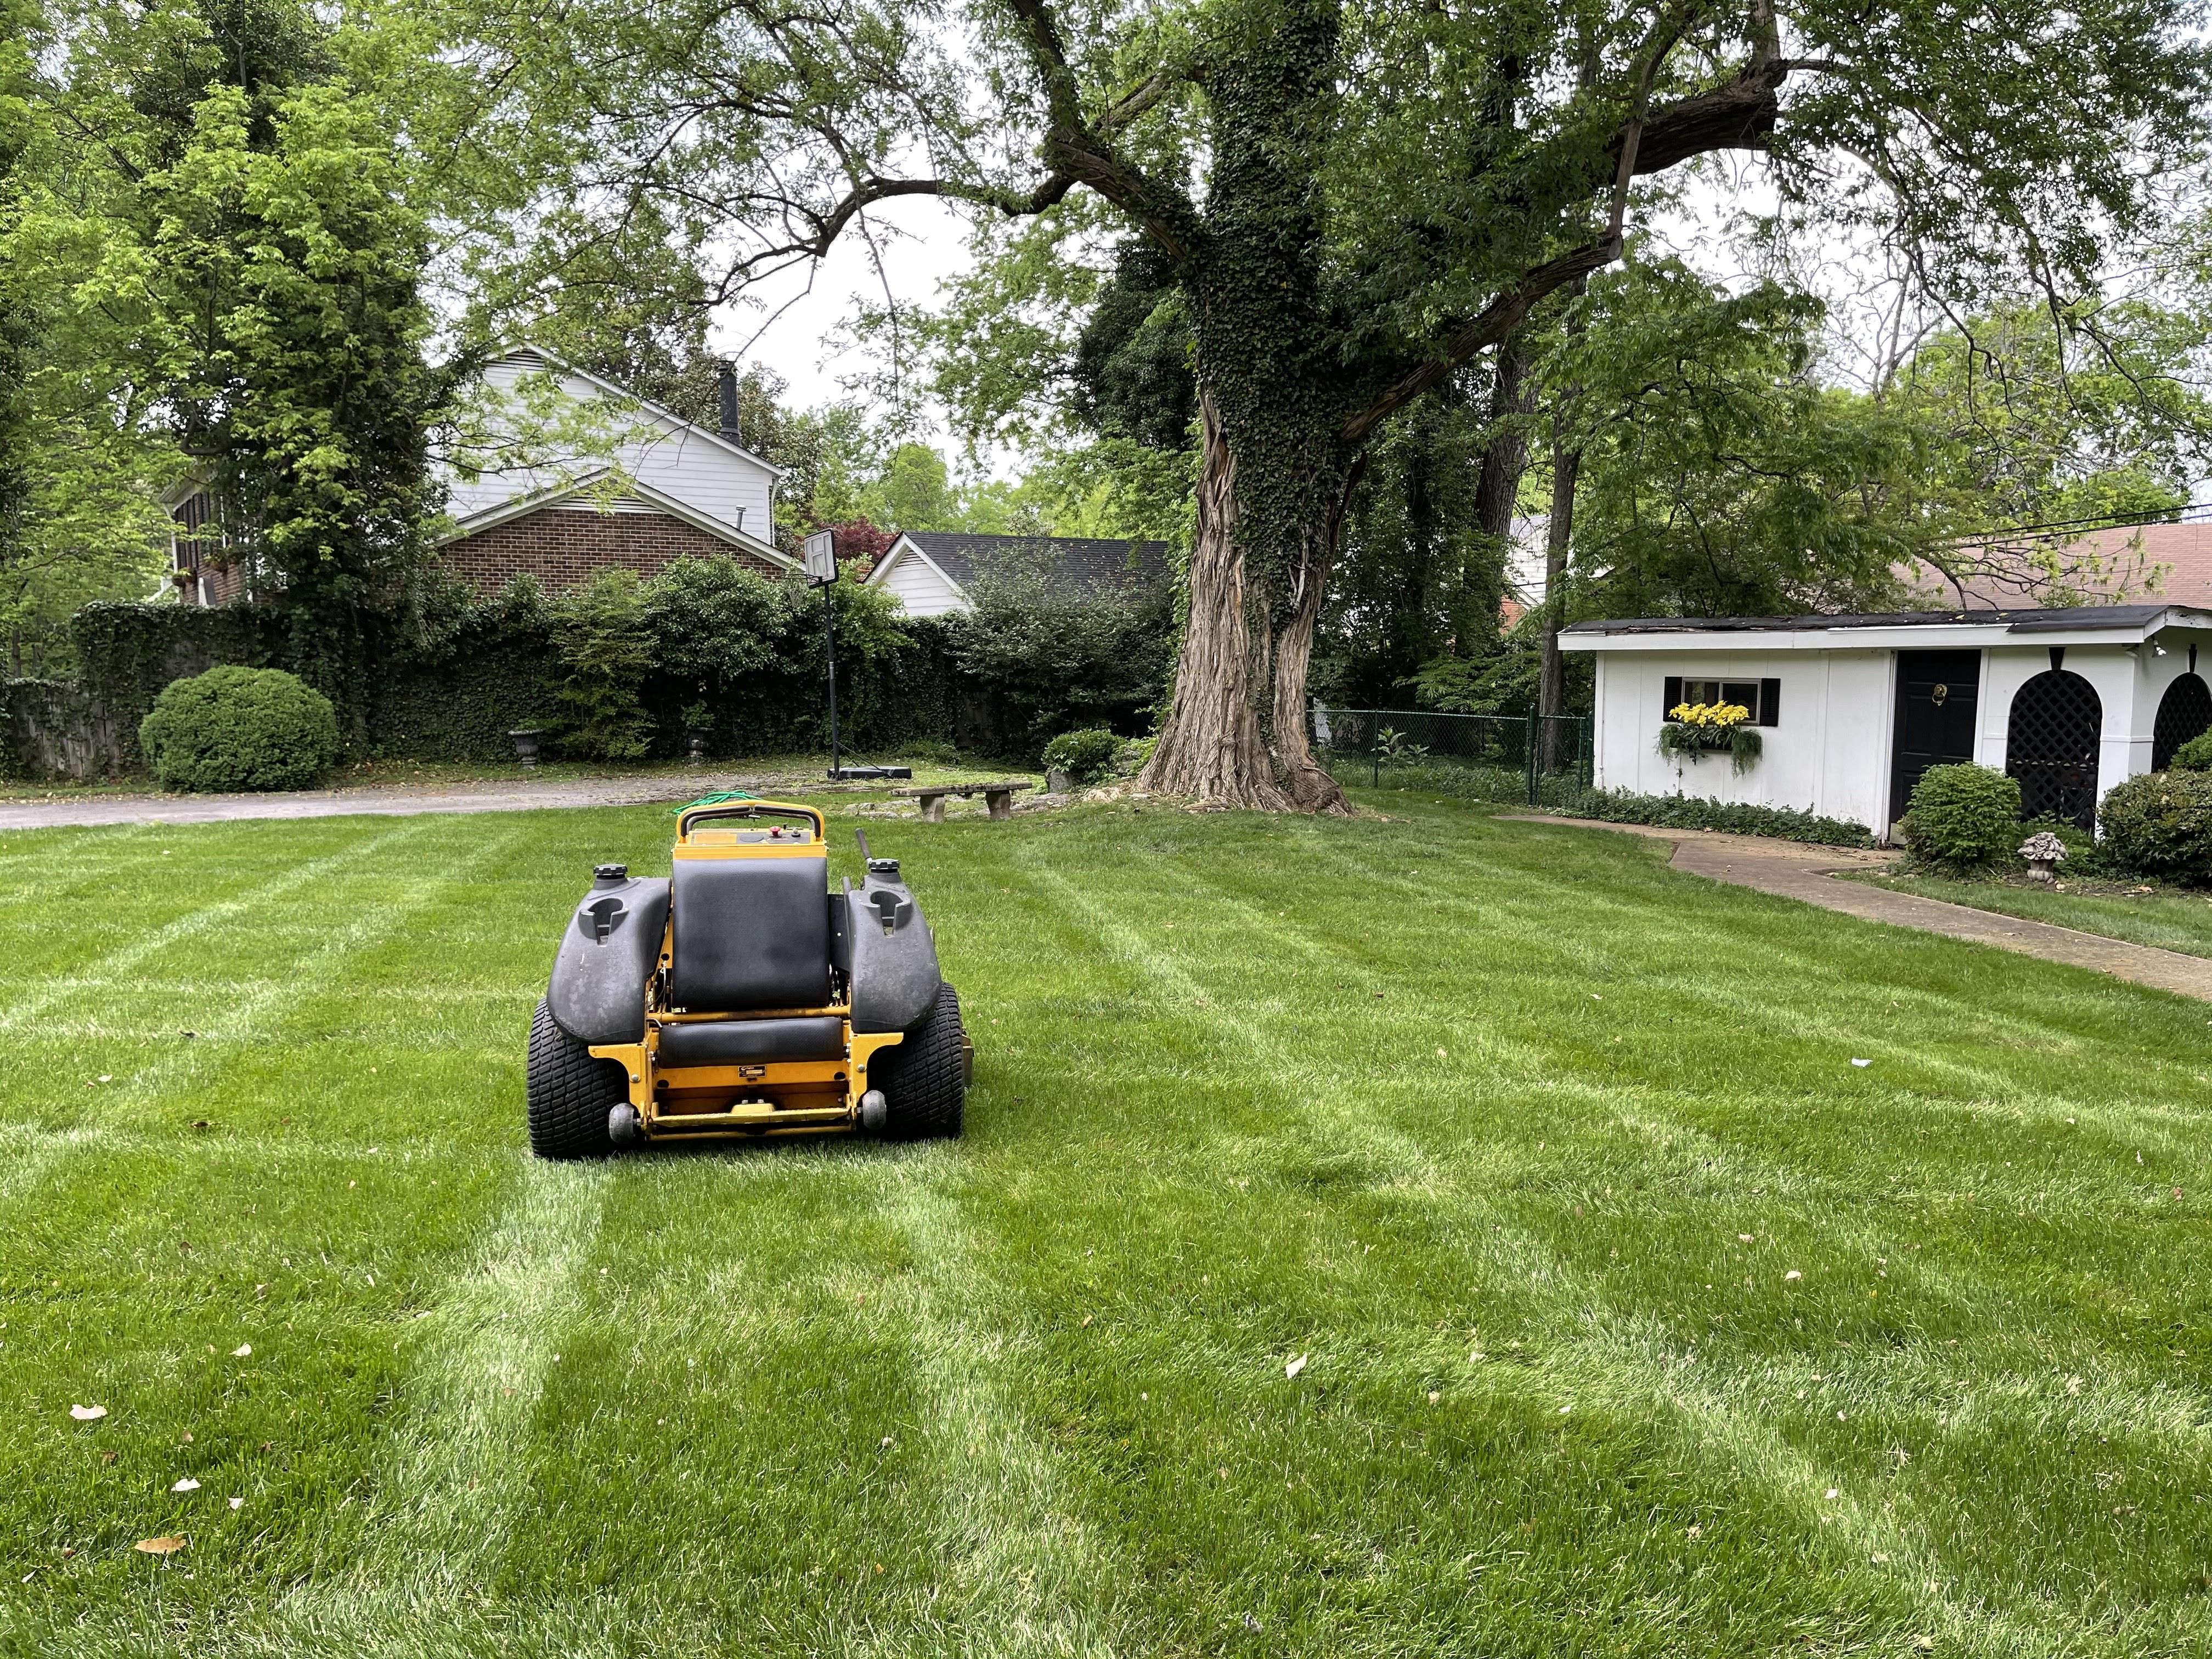 Landscaping for The Right Price Right Choice Lawn Care Services in Murfreesboro, TN